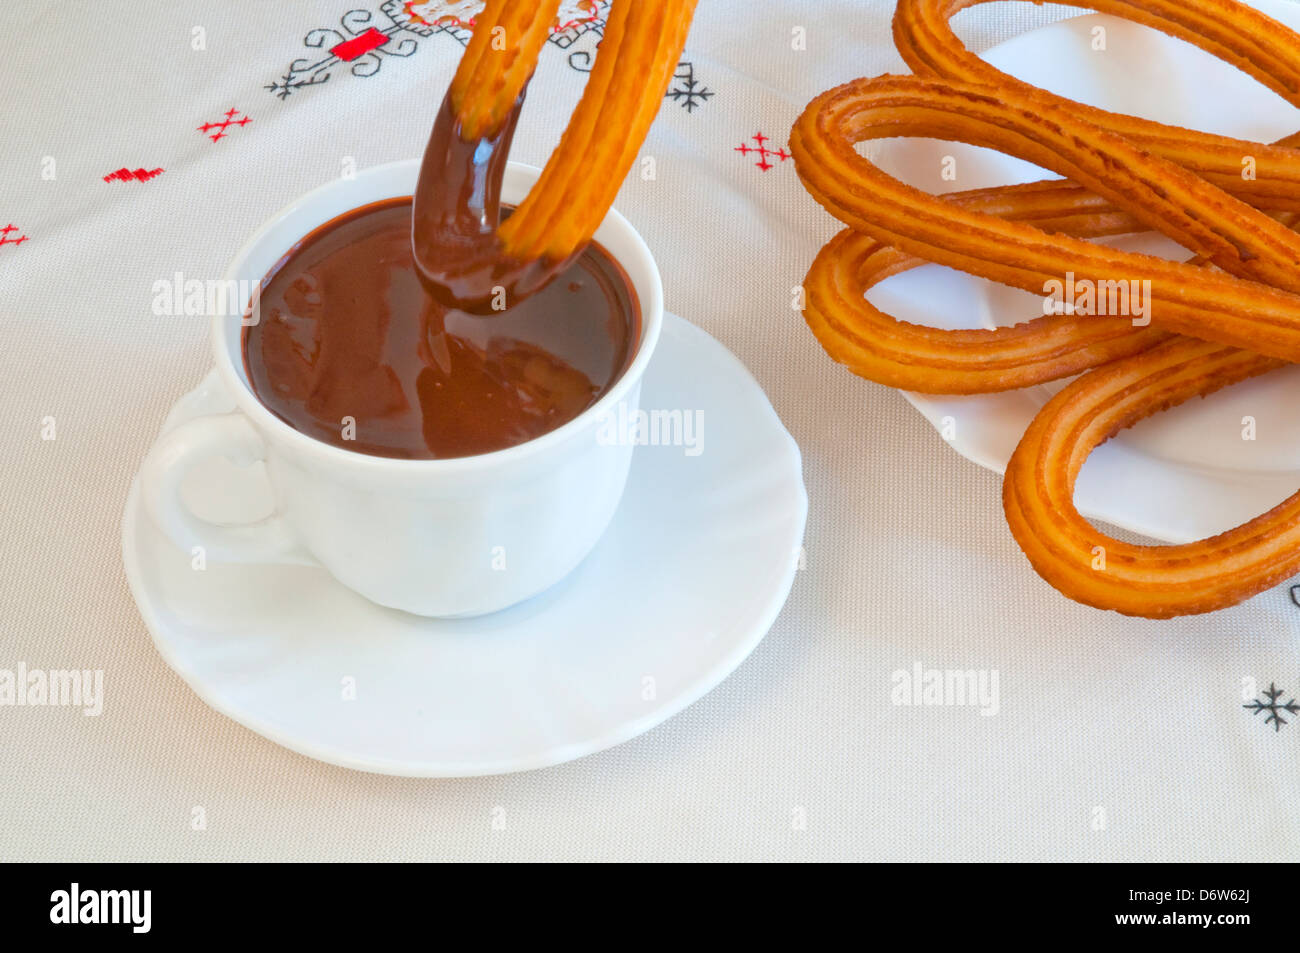 Chocolate with churros. Close view. Stock Photo